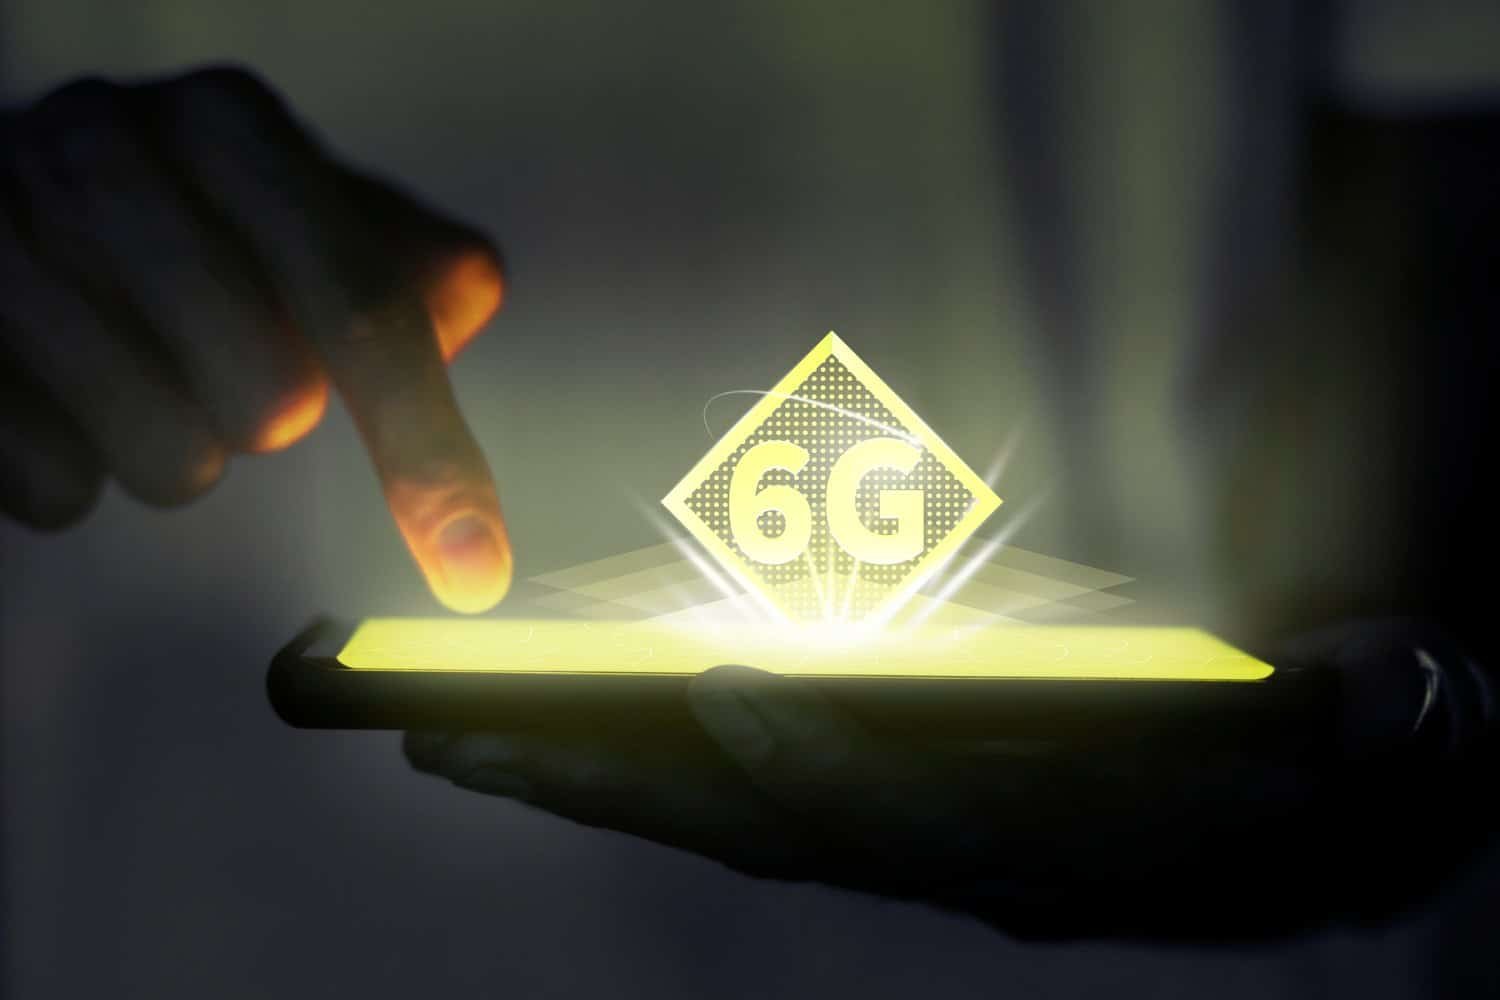 The Impact of 5G on Smartphone Usage